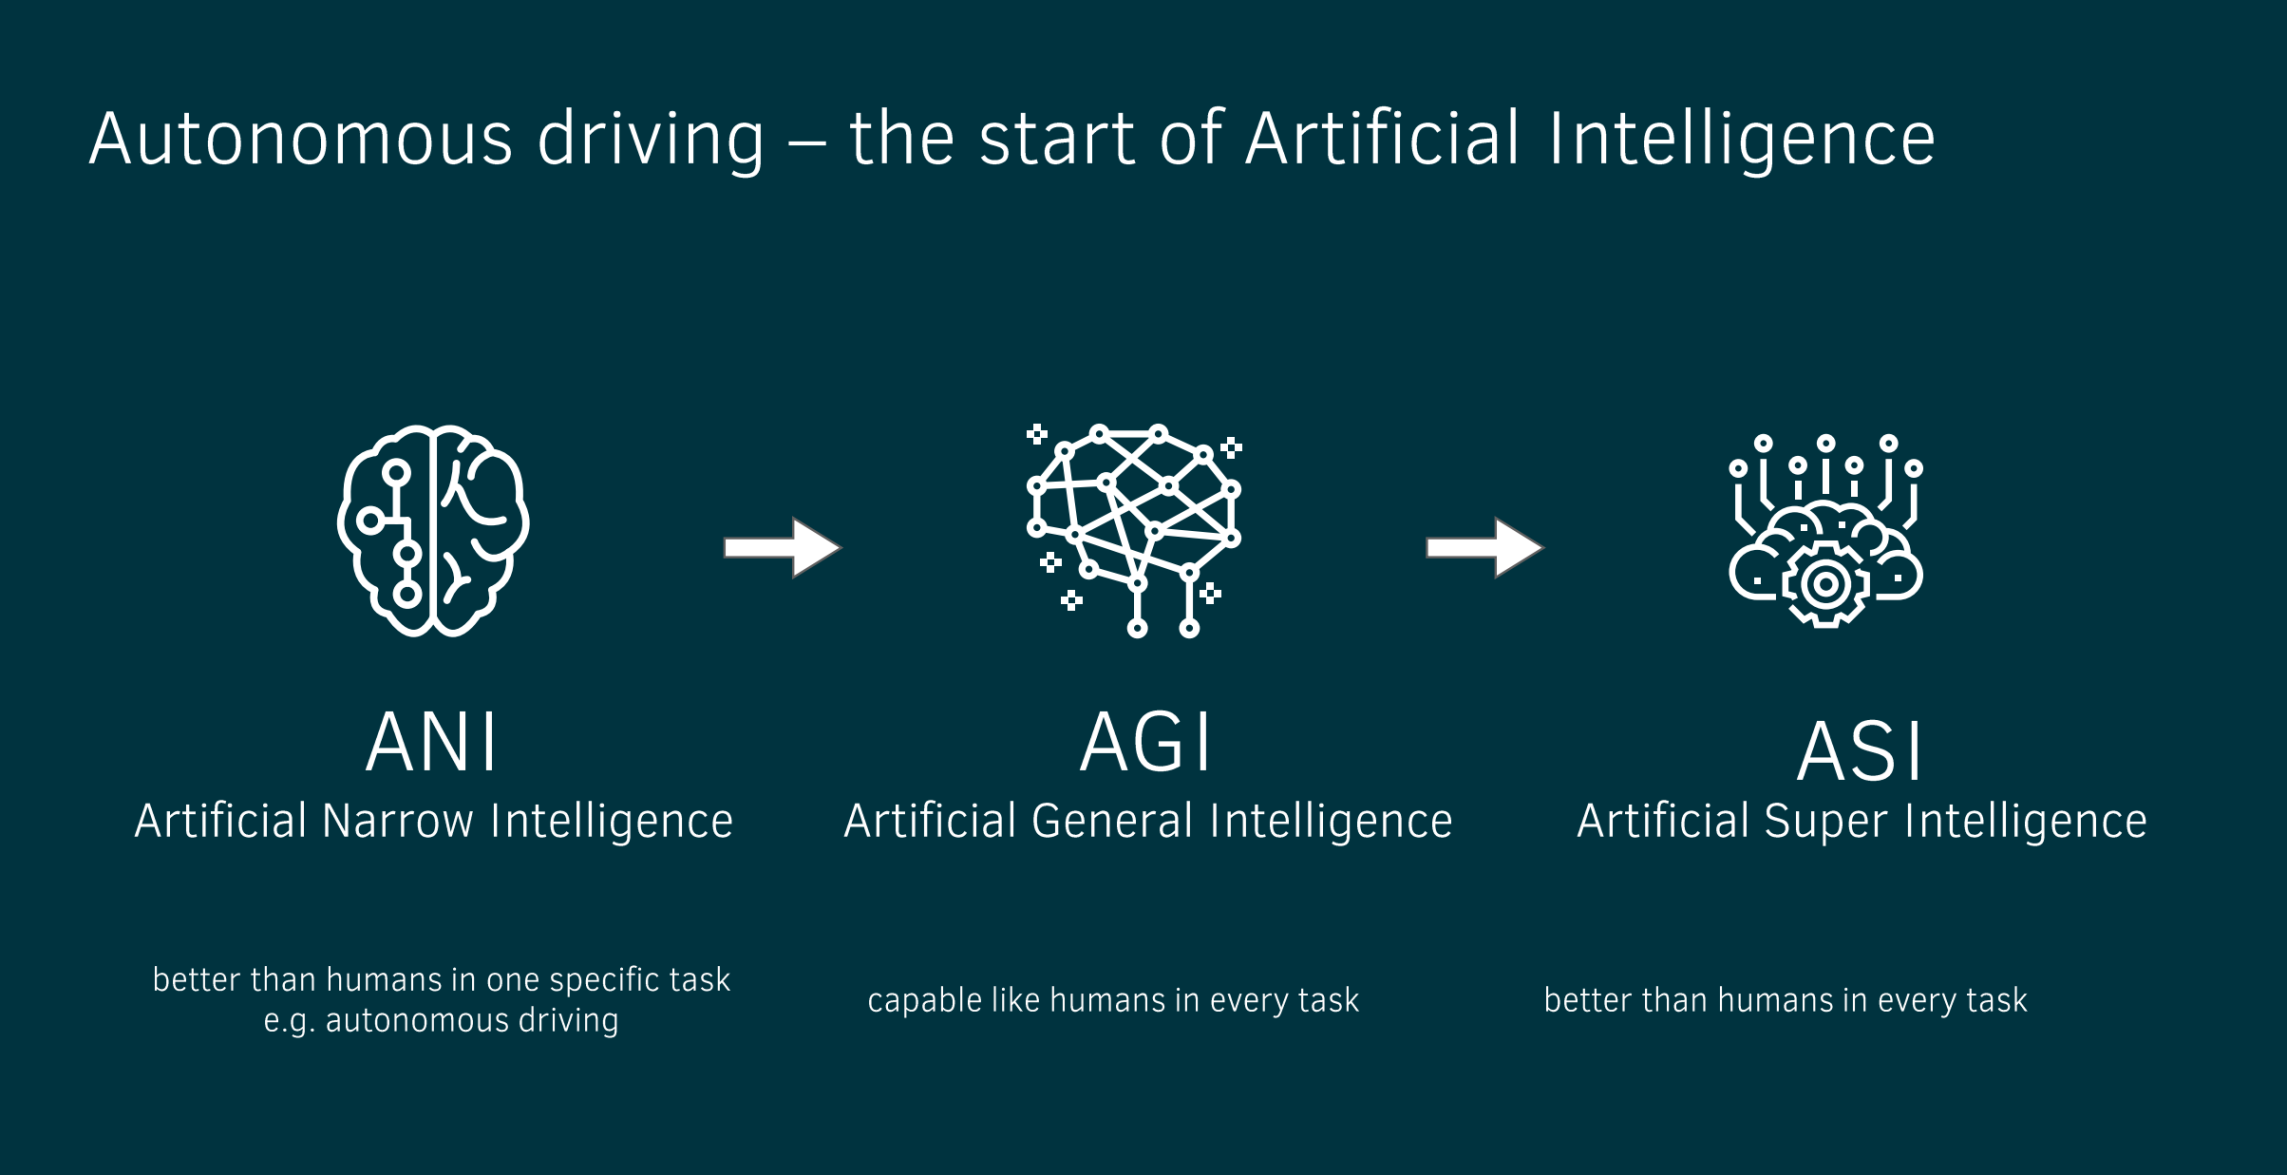 Unleash The Power Of AI With AGI: Your Guide To Artificial Intelligence Evolution